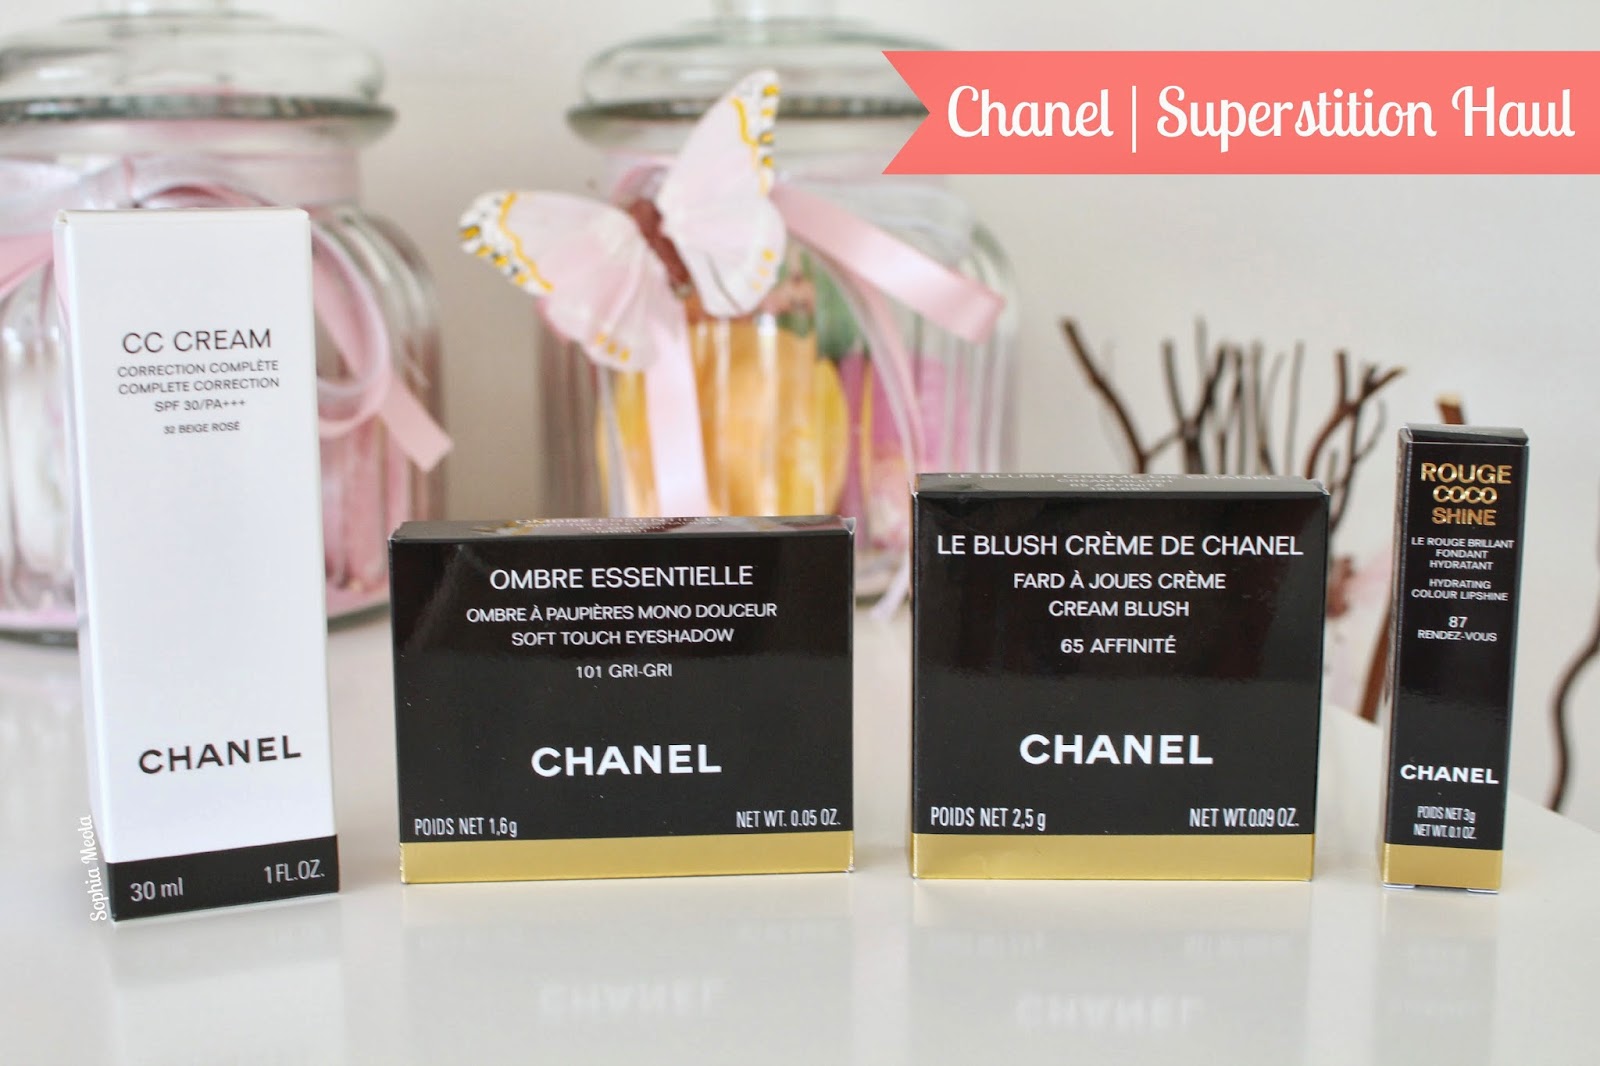 Chanel Haul, Superstition Autumn 2013 Collection, Sophia Meola